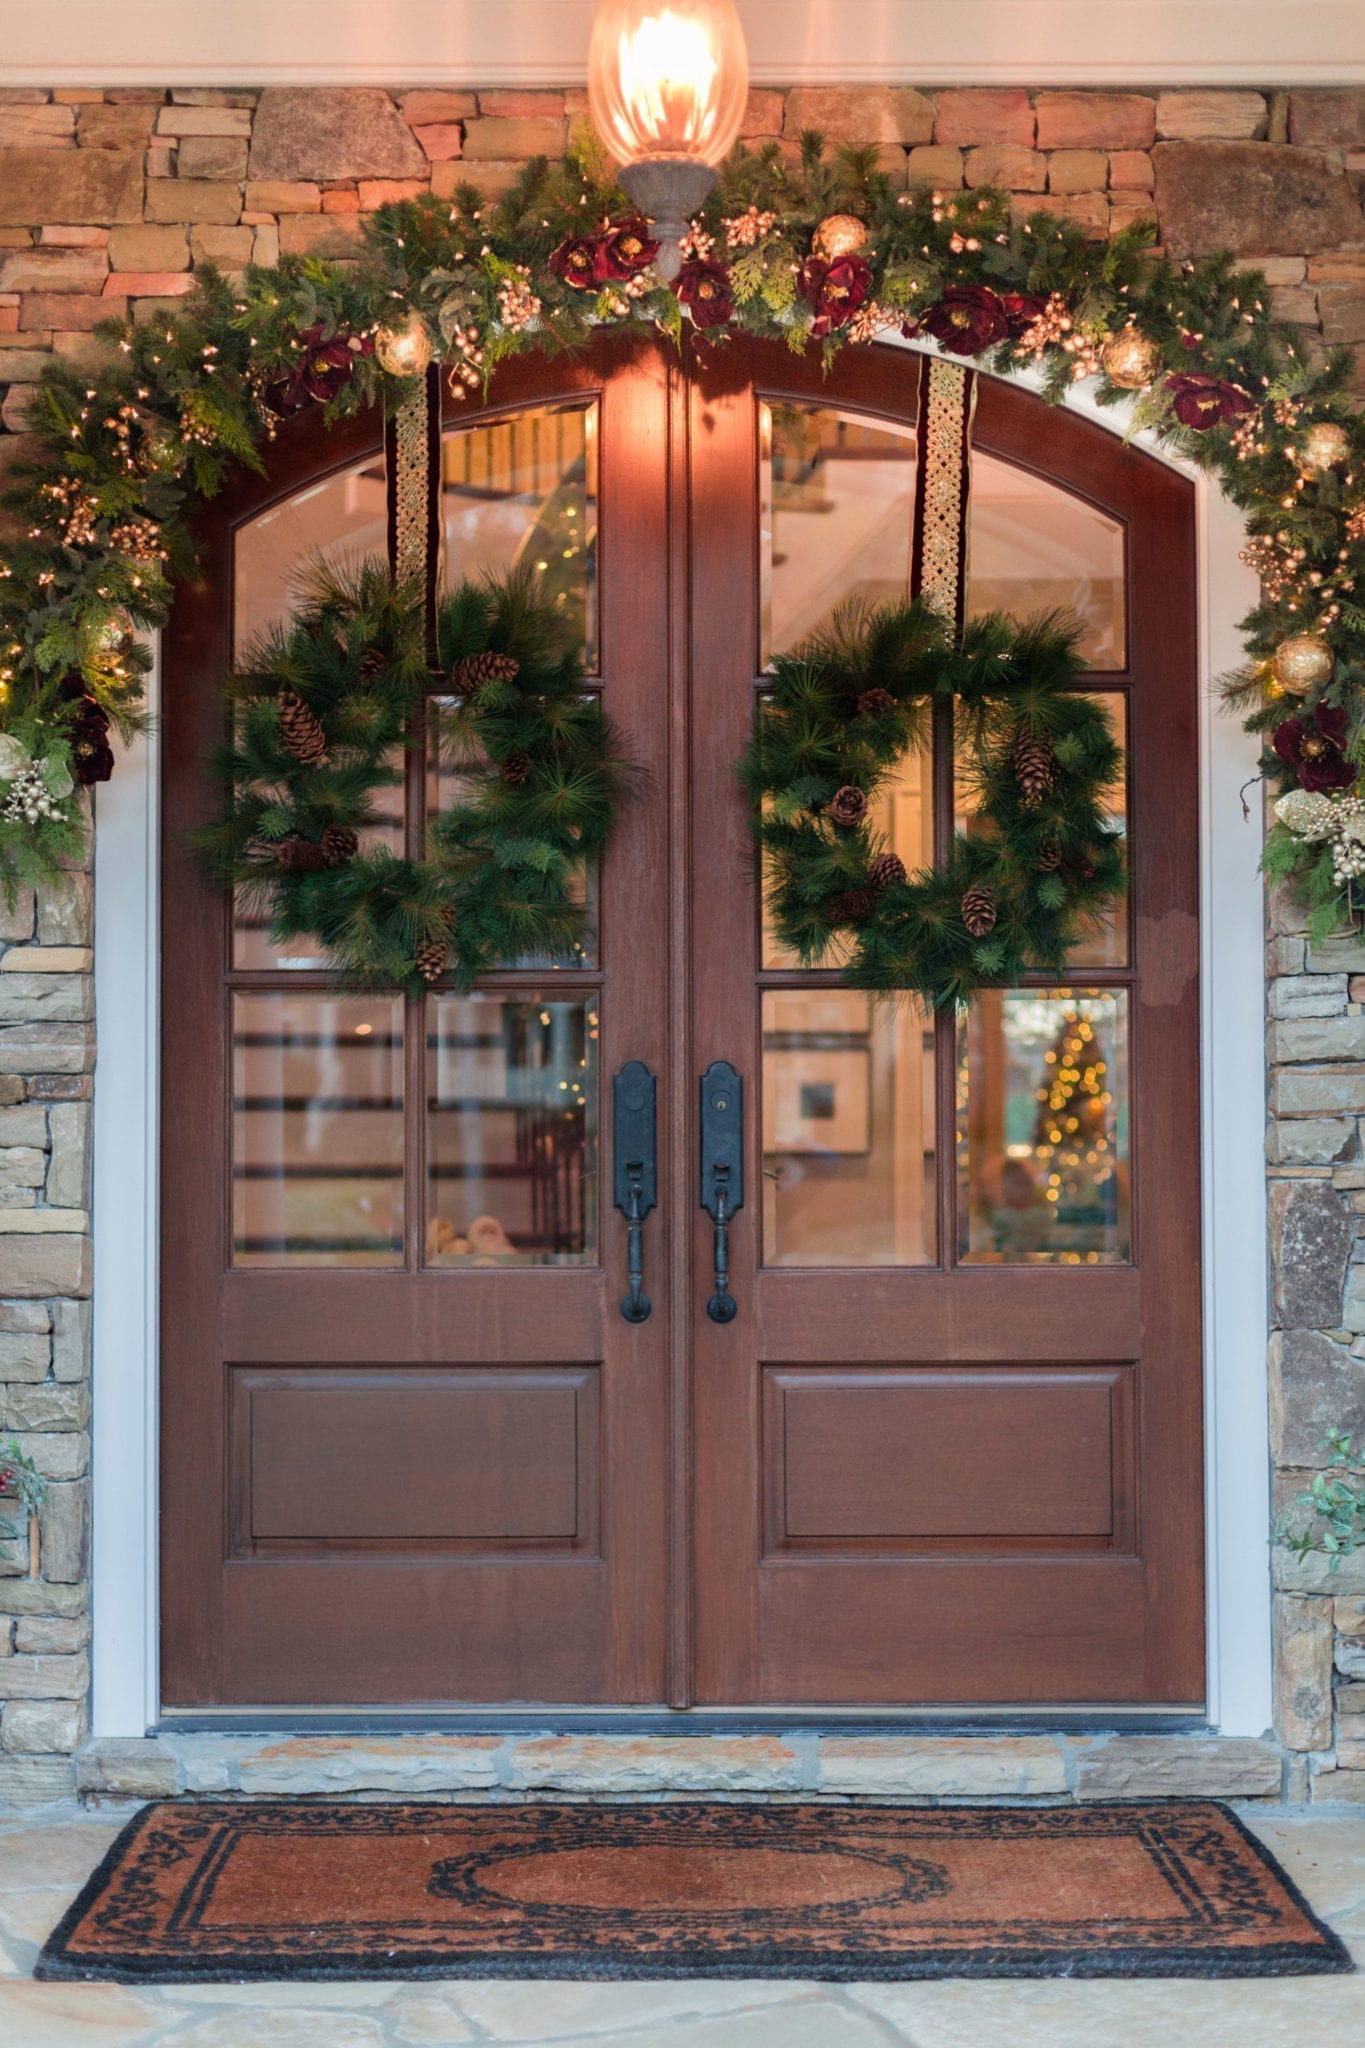 How to Hang Garland on Stone Outside. Front door holiday decorating with wreaths and garland.